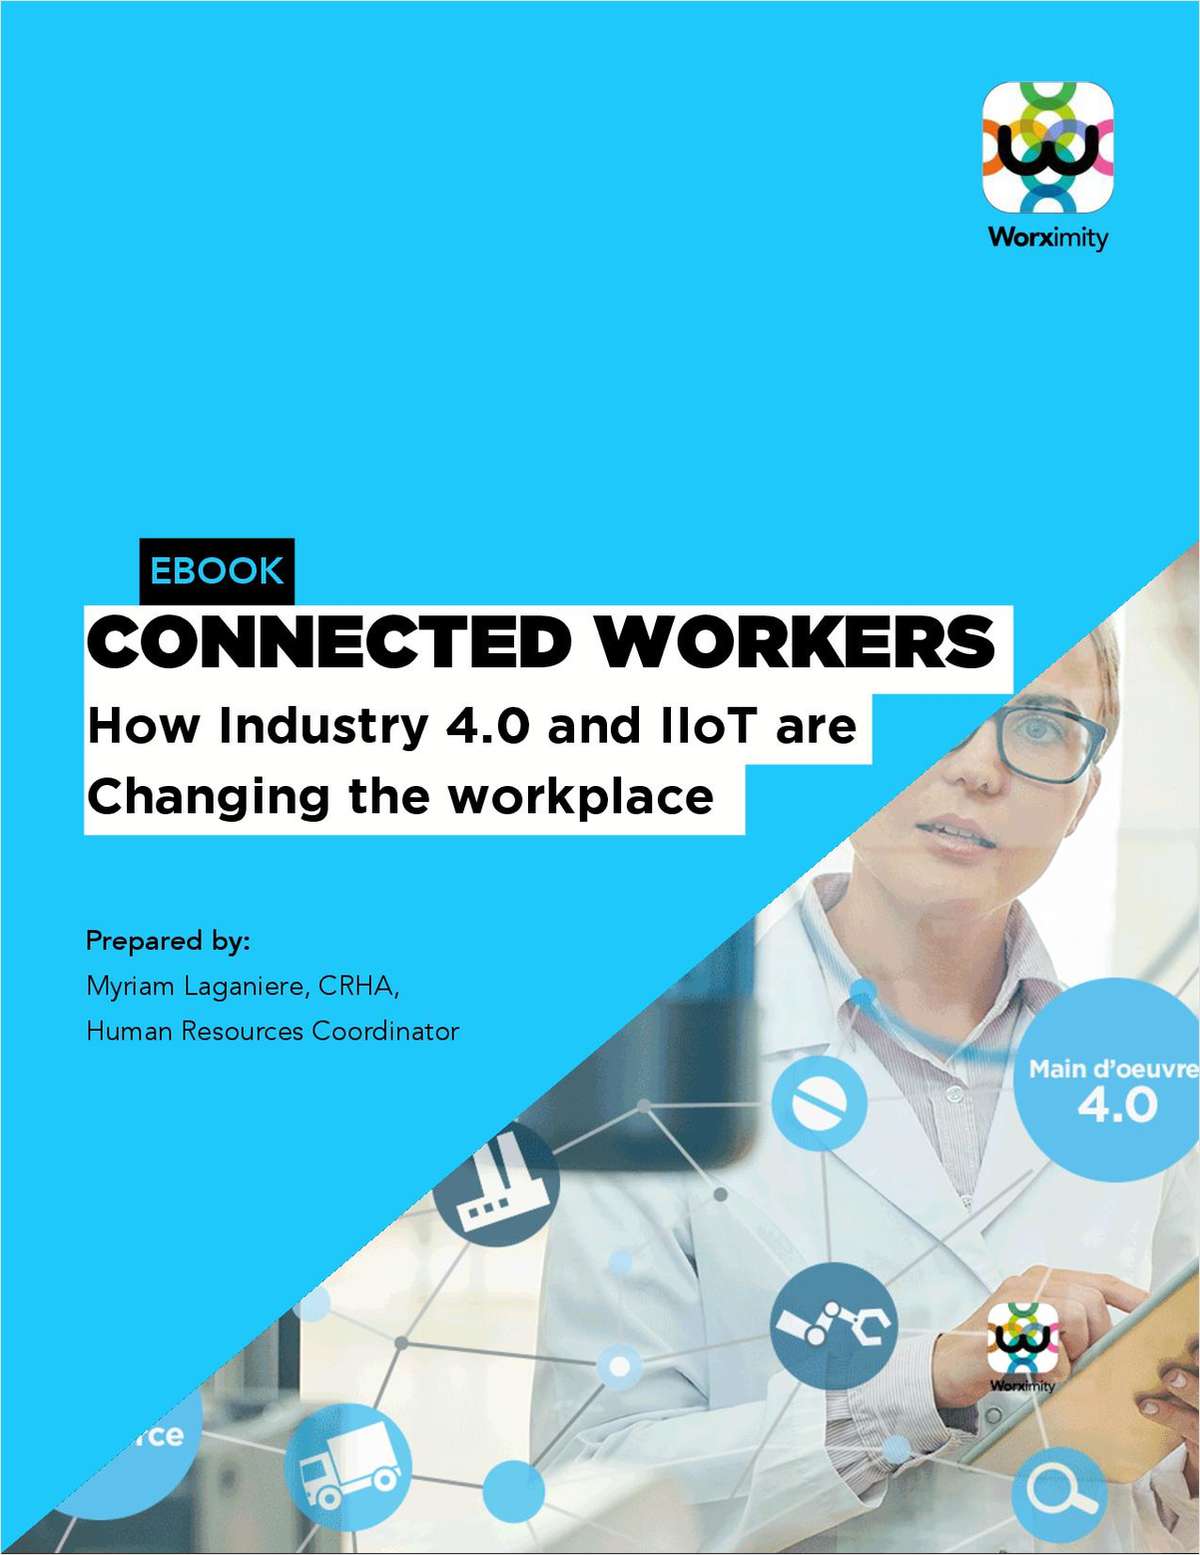 Connected Workers - How Industry 4.0 and IIoT are Changing the Workplace for Food Manufacturers